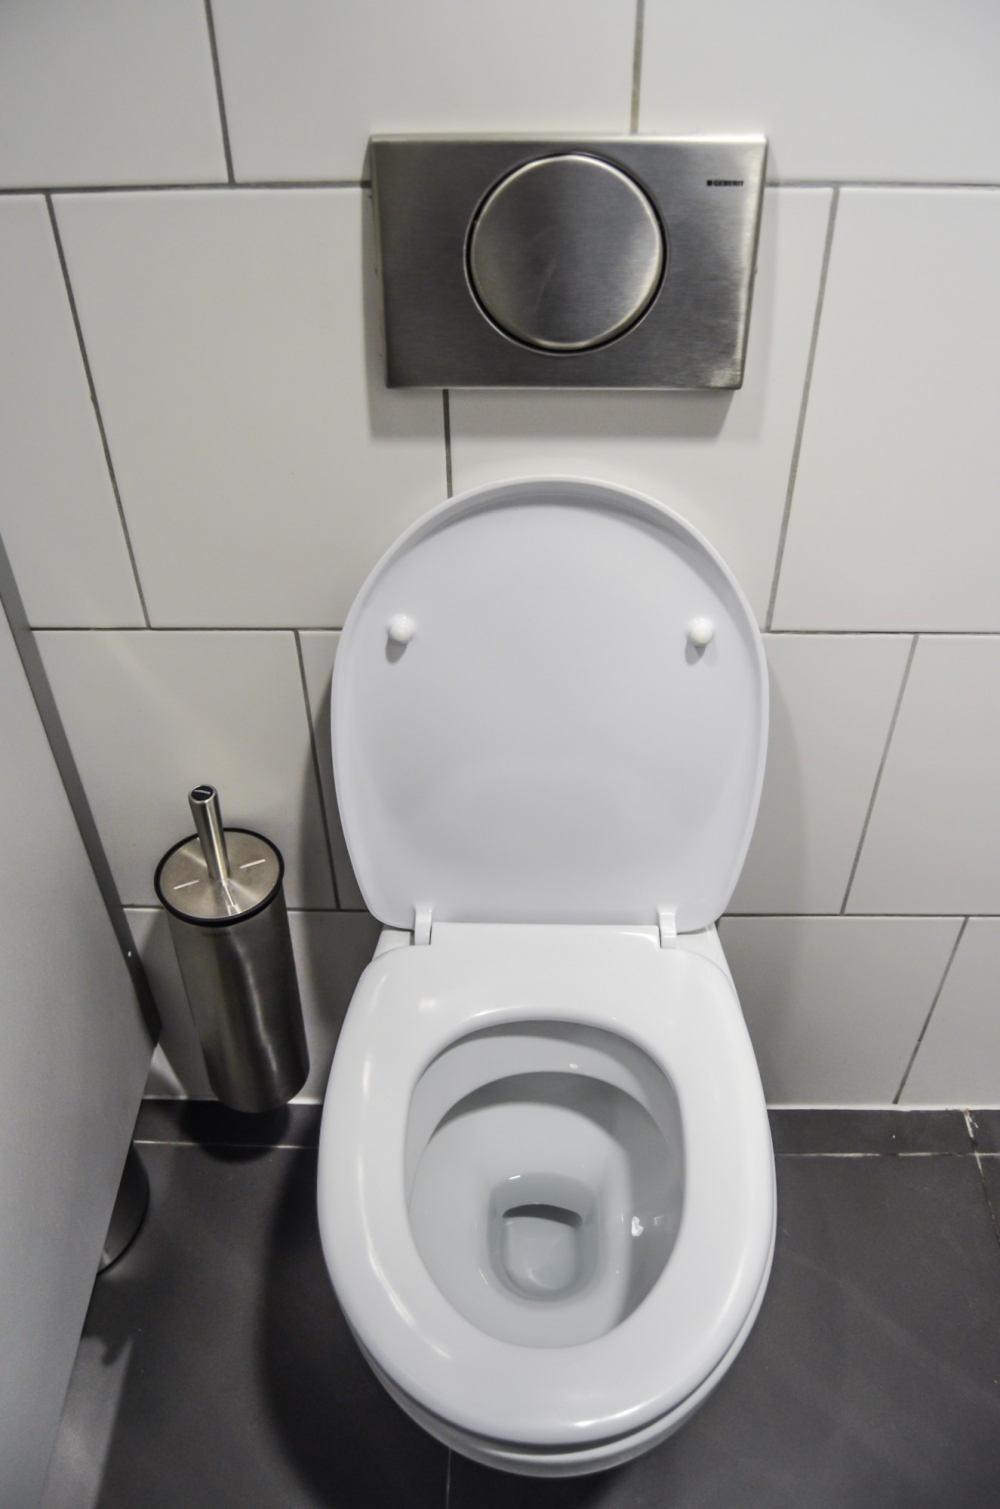 Why Is My Toilet Running? 4 Common Causes and Solutions